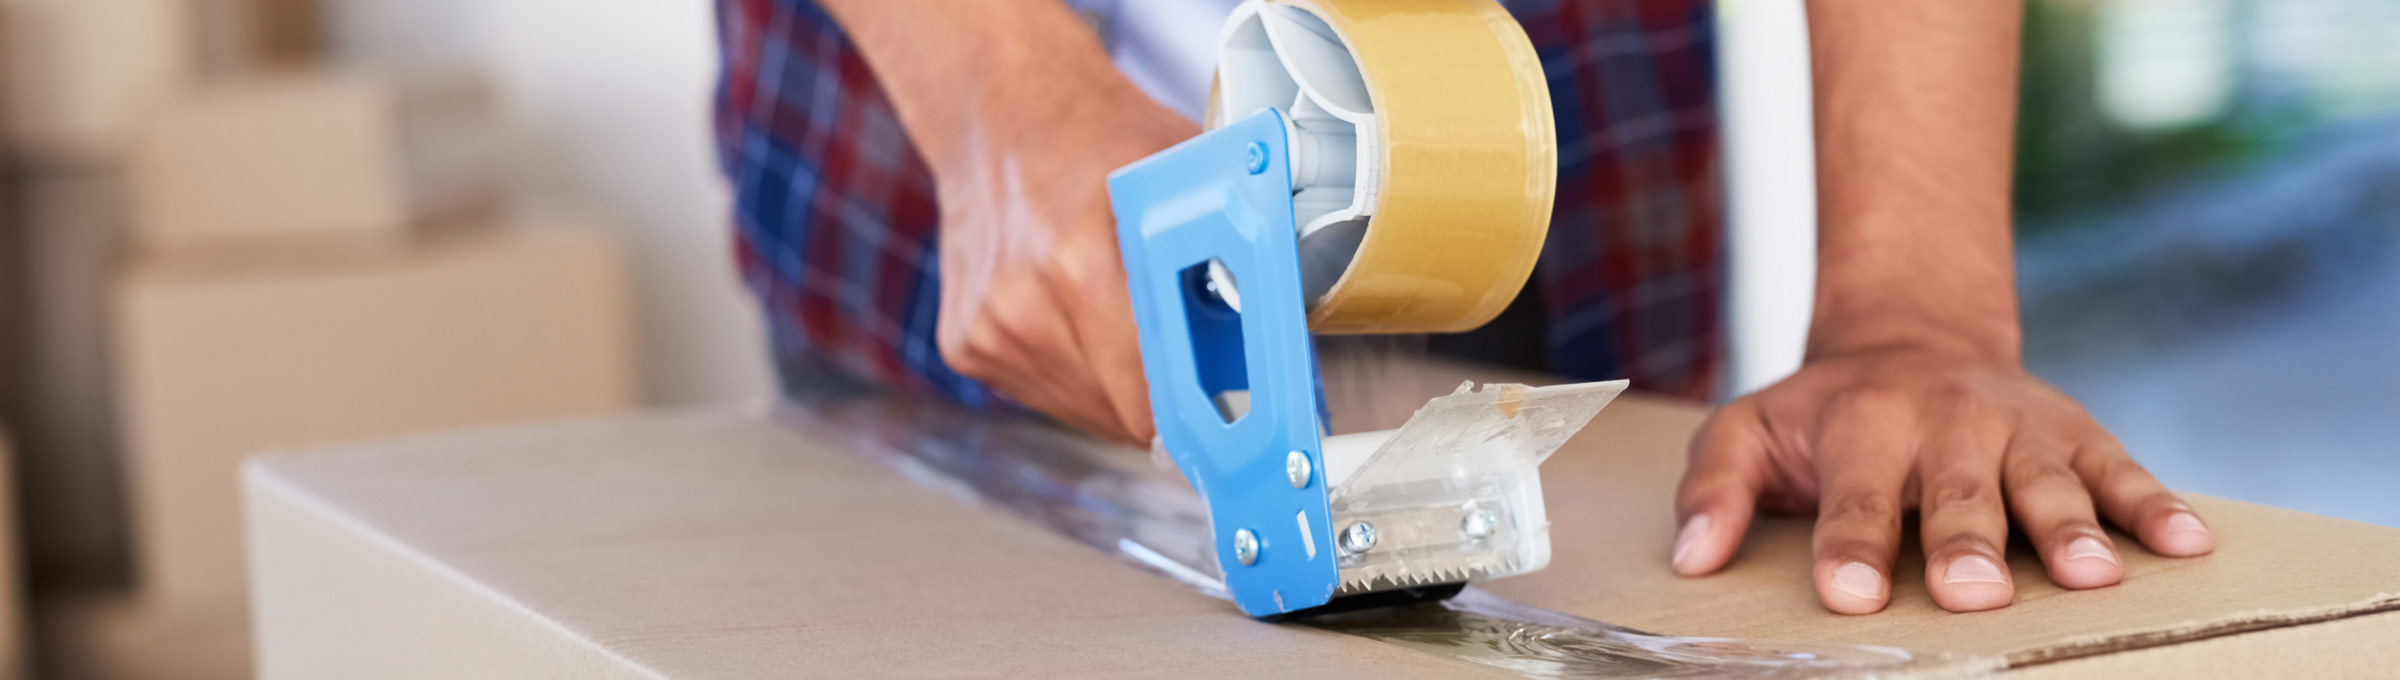 Man's hands with packing tape on packing box